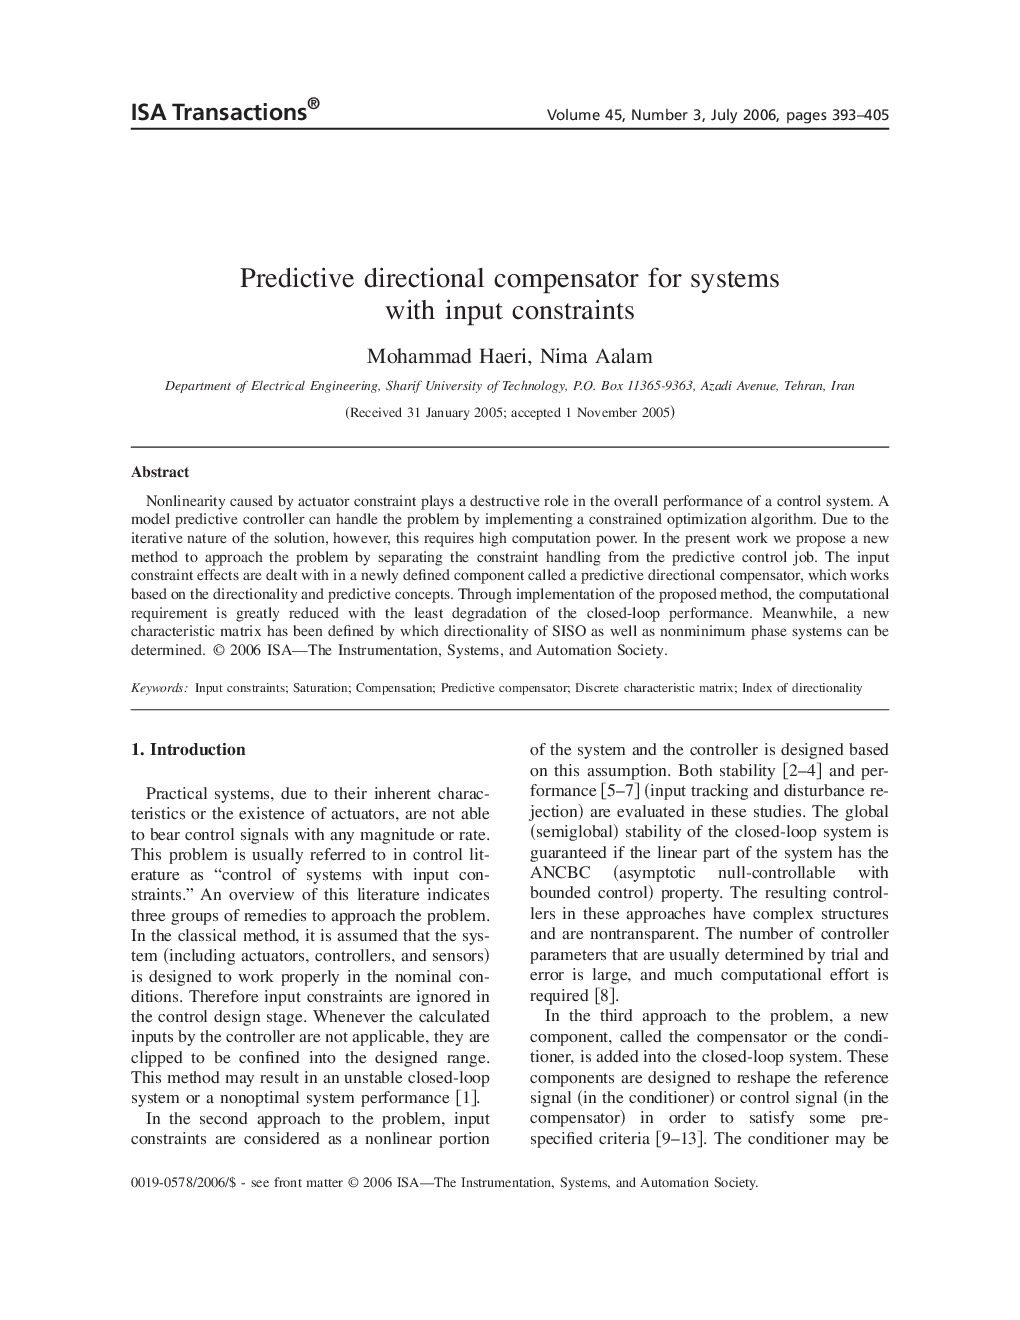 Predictive directional compensator for systems with input constraints